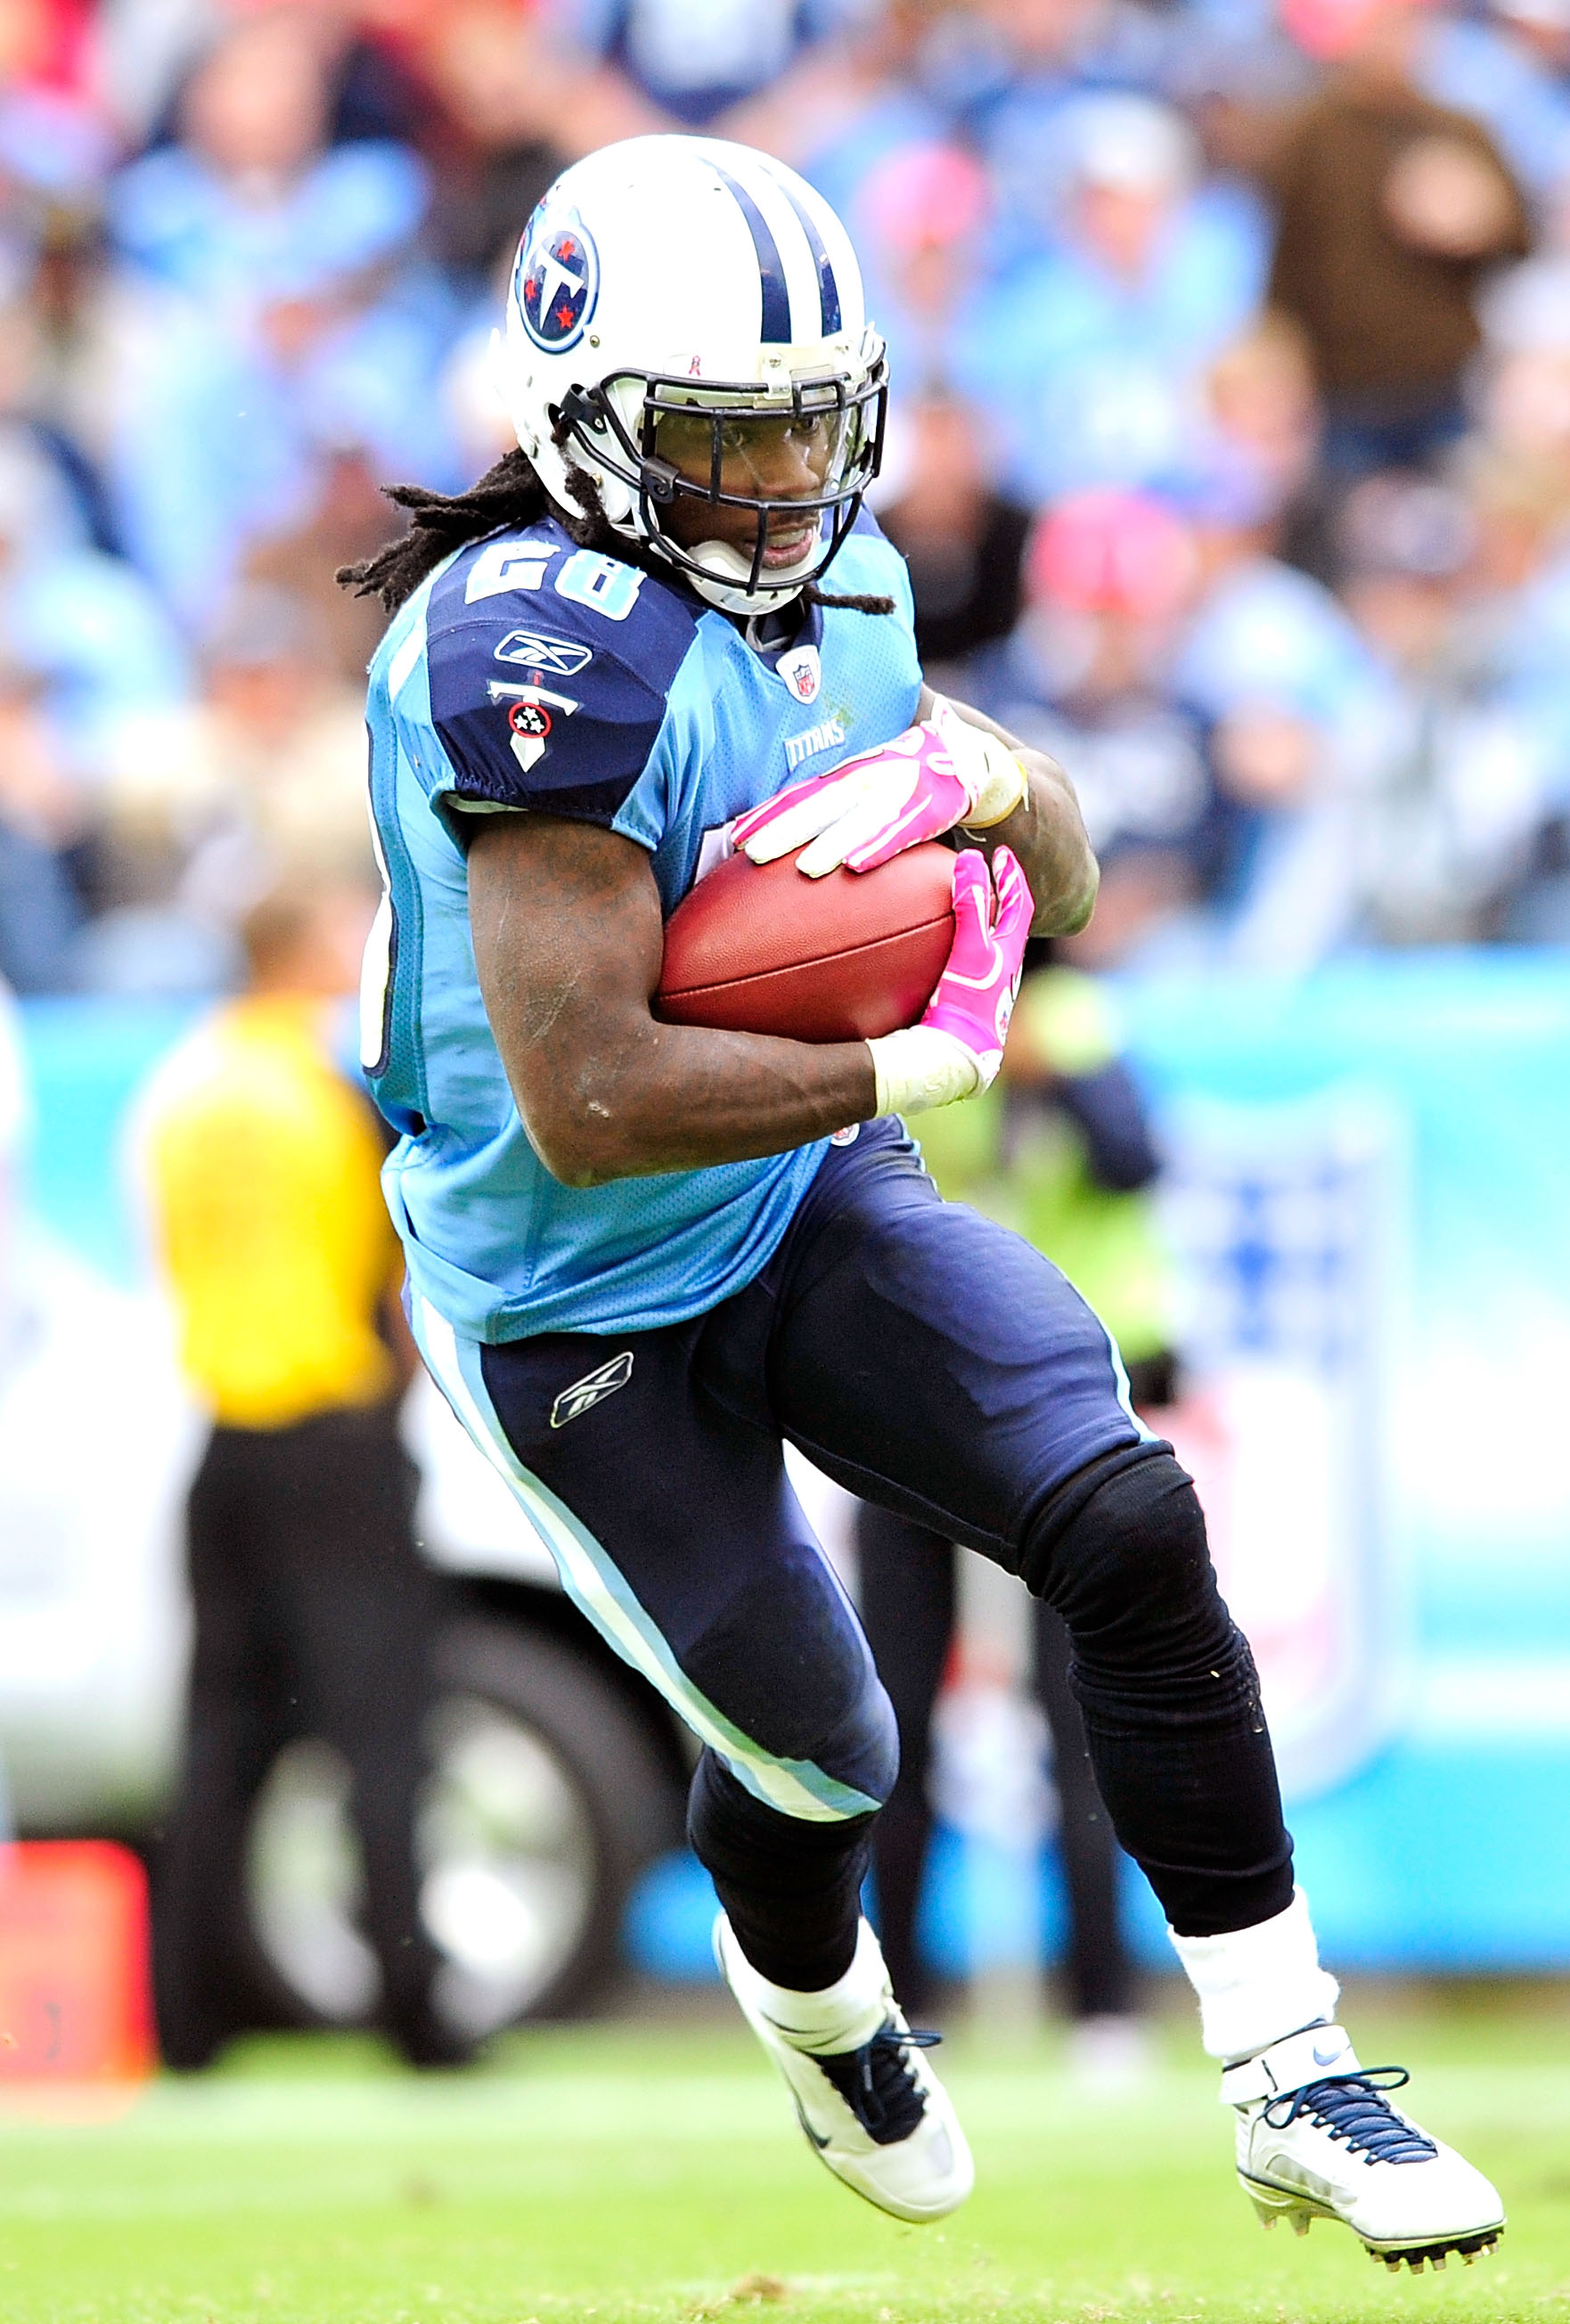 NASHVILLE, TN - OCTOBER 03:  Chris Johnson #28 of the Tennessee Titans runs against the Denver Broncos at LP Field on October 3, 2010 in Nashville, Tennessee. Denver won 26-20.  (Photo by Grant Halverson/Getty Images)